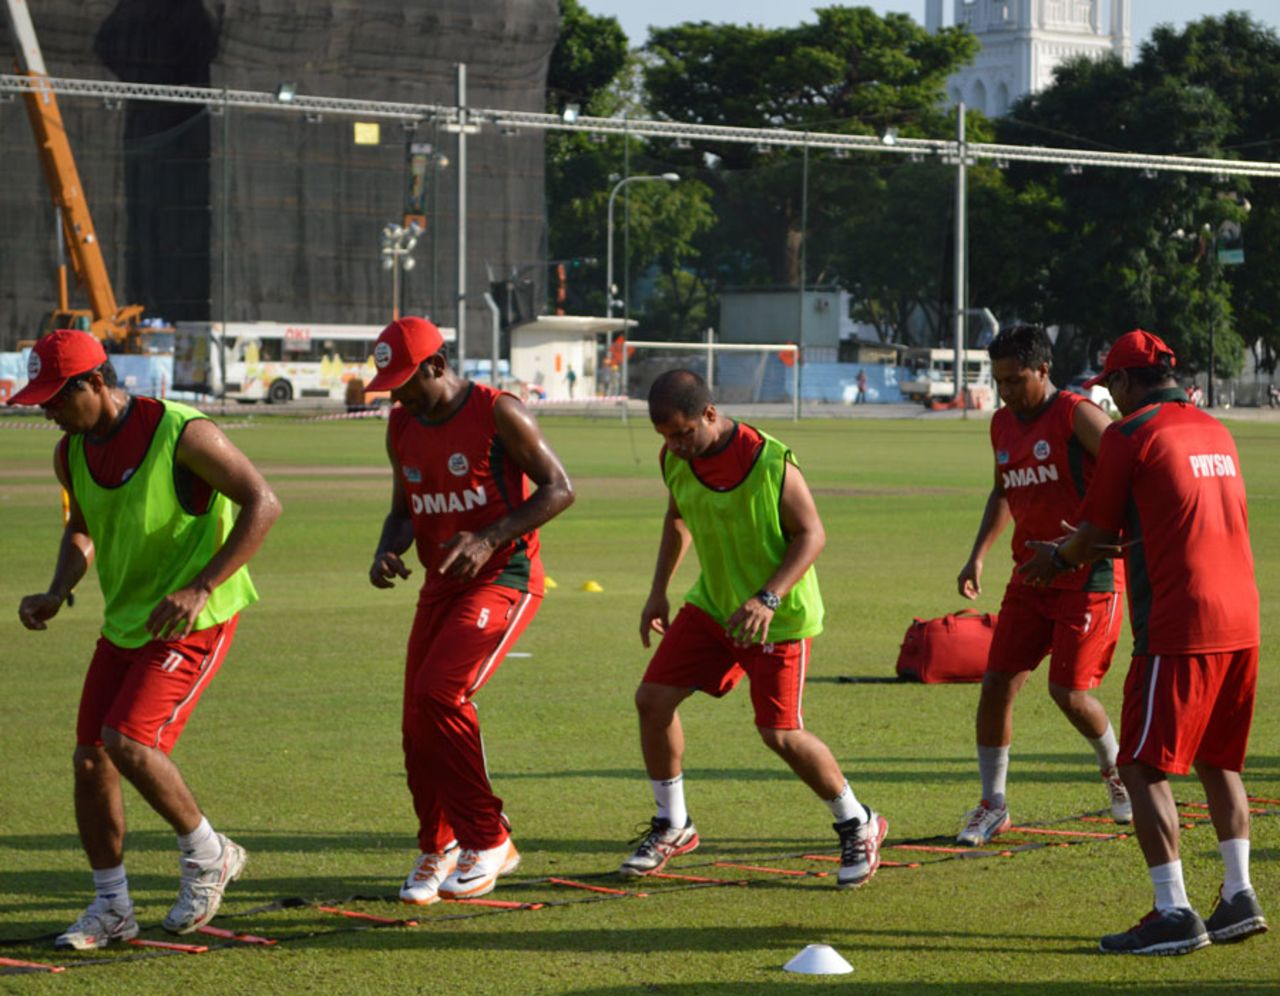 The Oman team in training, Italy v Oman, ICC World Cricket League Division Four, Singapore, June 21, 2014